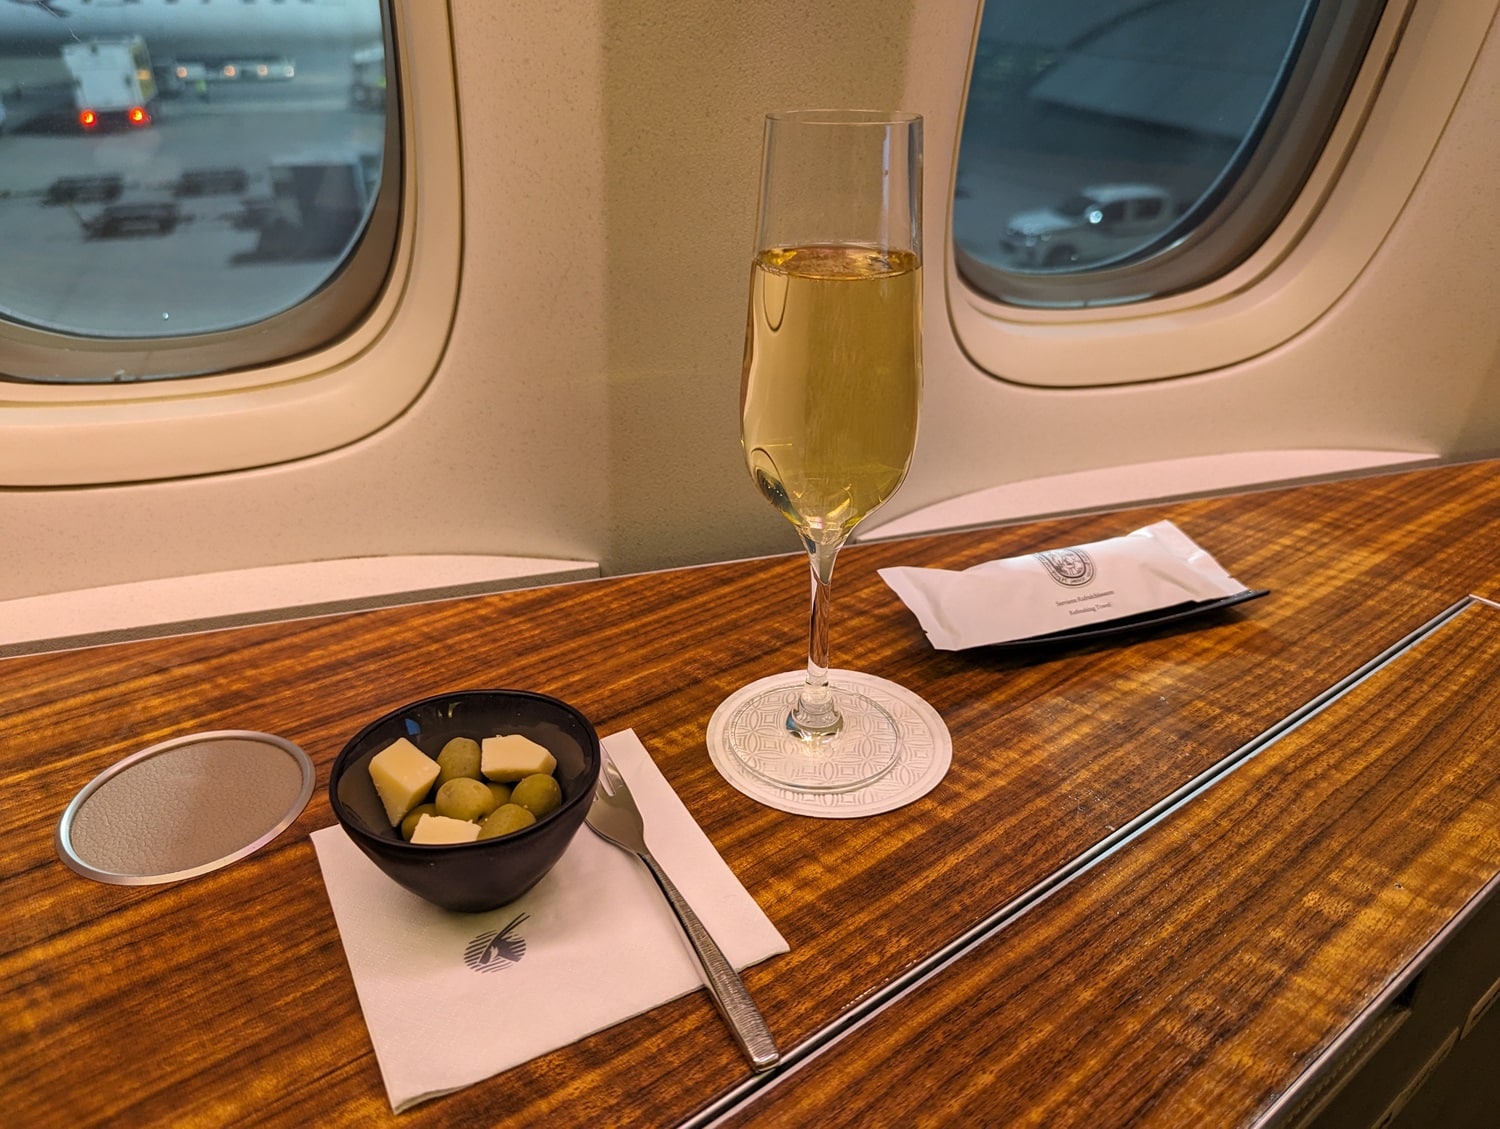 qatar airways first class 777-300er welcome drink with snack